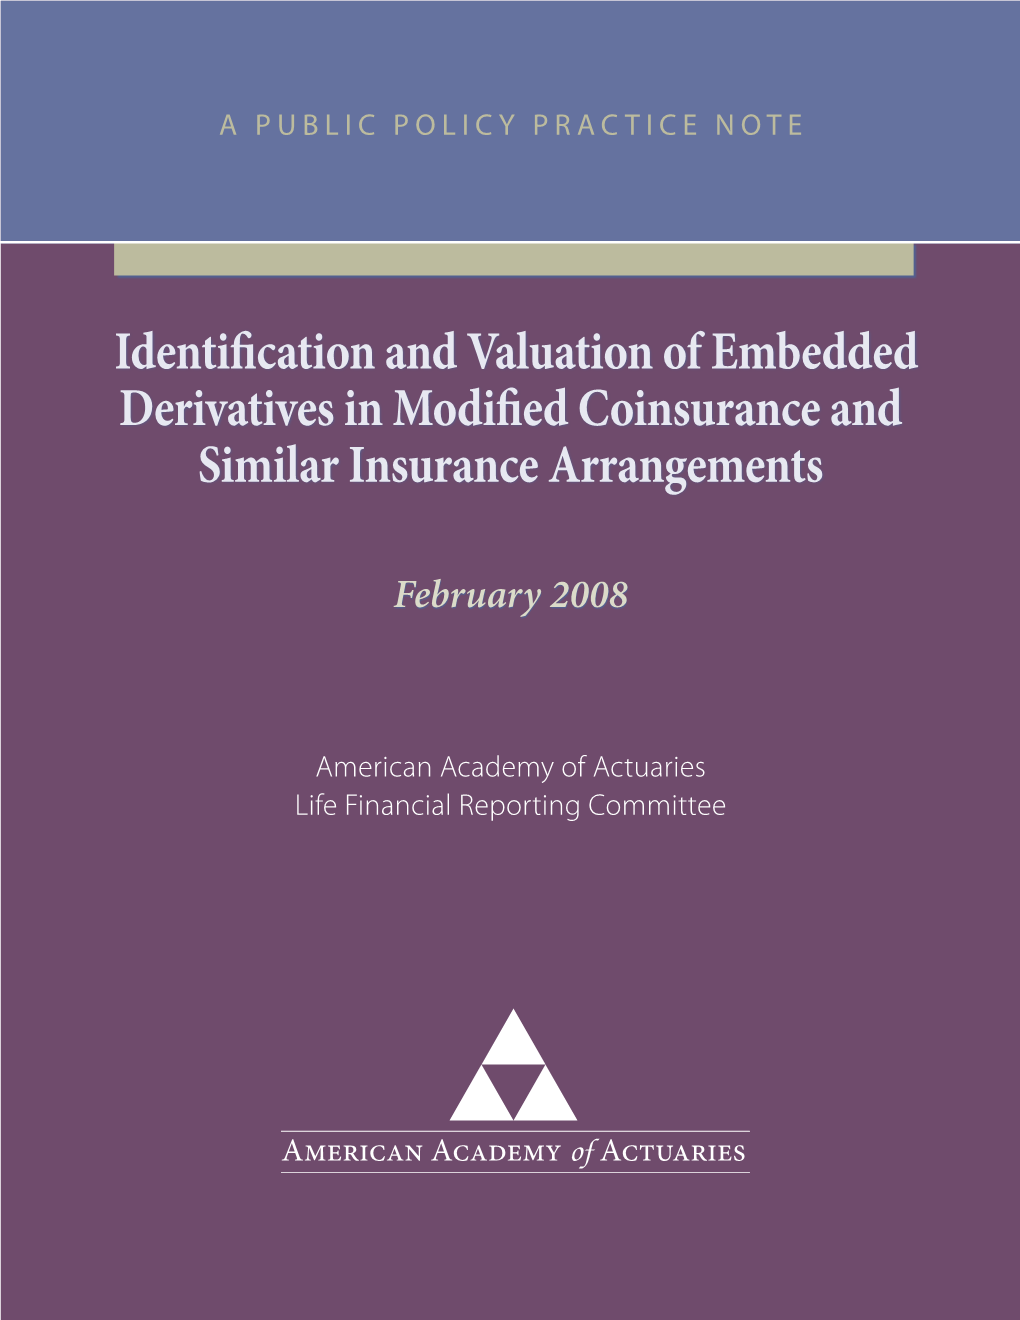 Identification and Valuation of Embedded Derivatives in Modified Coinsurance and Similar Insurance Arrangements